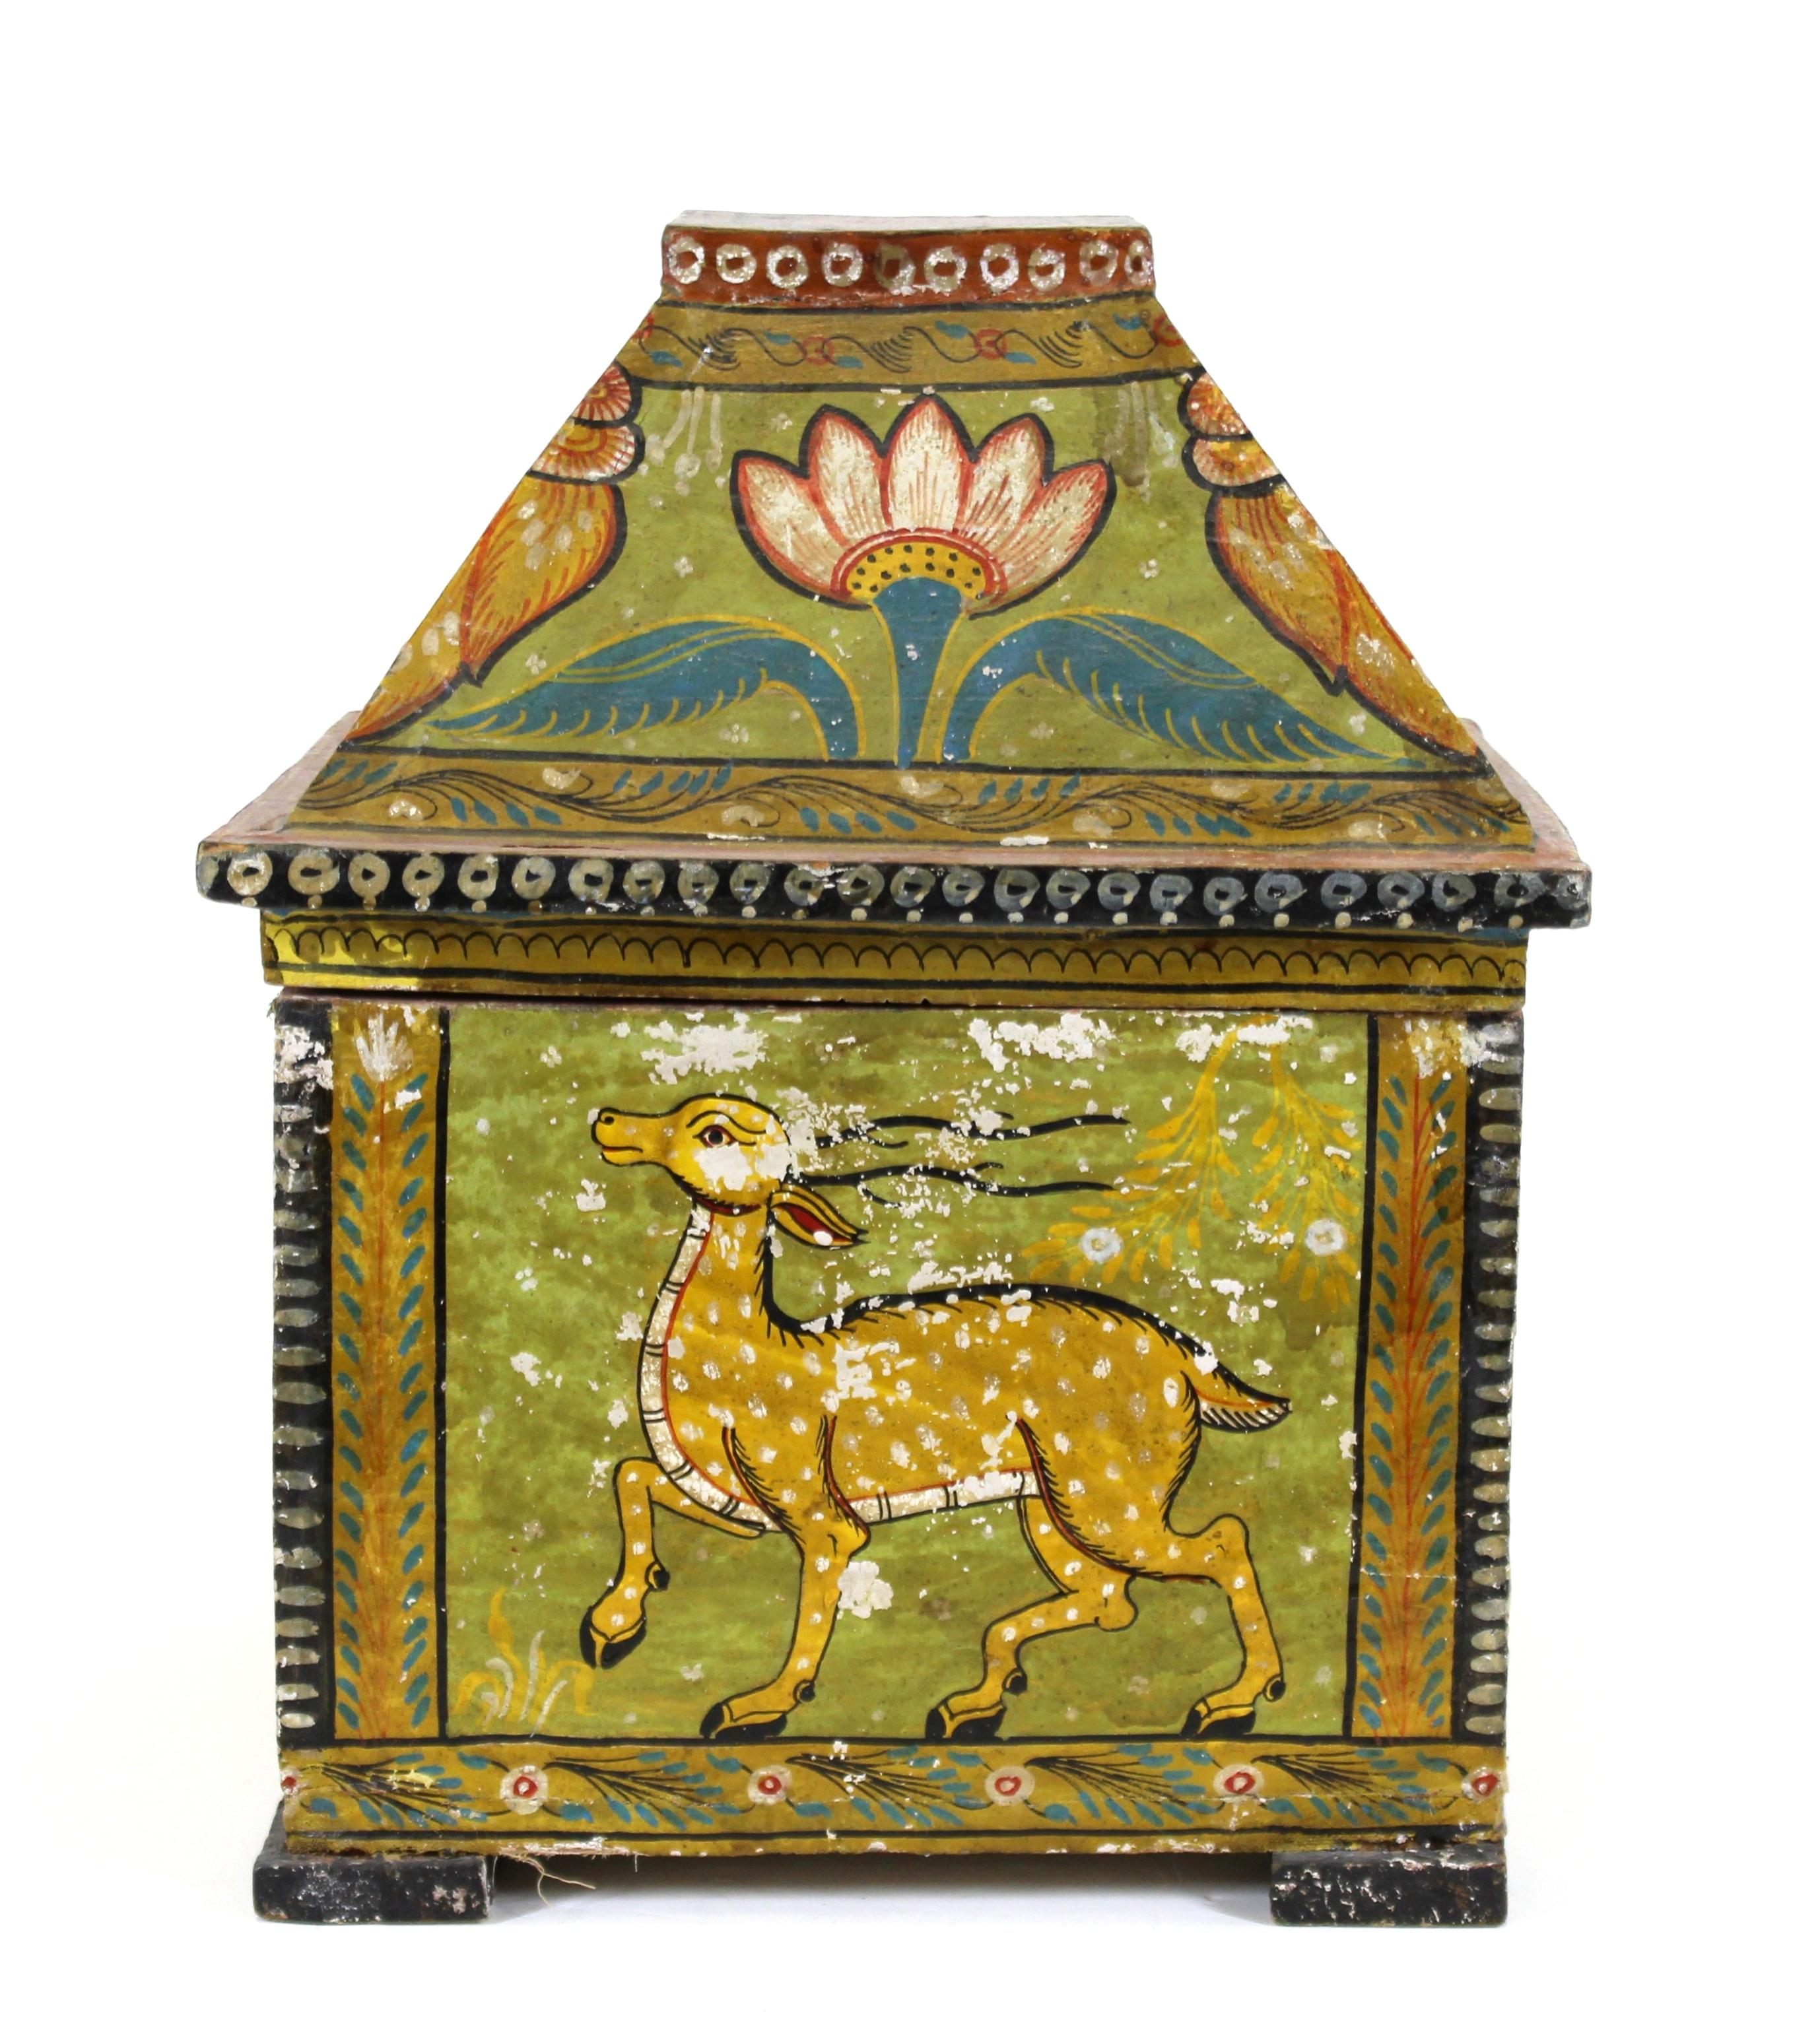 Indian square lidded wood box, painted with colorful animal scenes on each side. 'Made in India' label on the inside of the lid. In great vintage condition with age-appropriate wear.